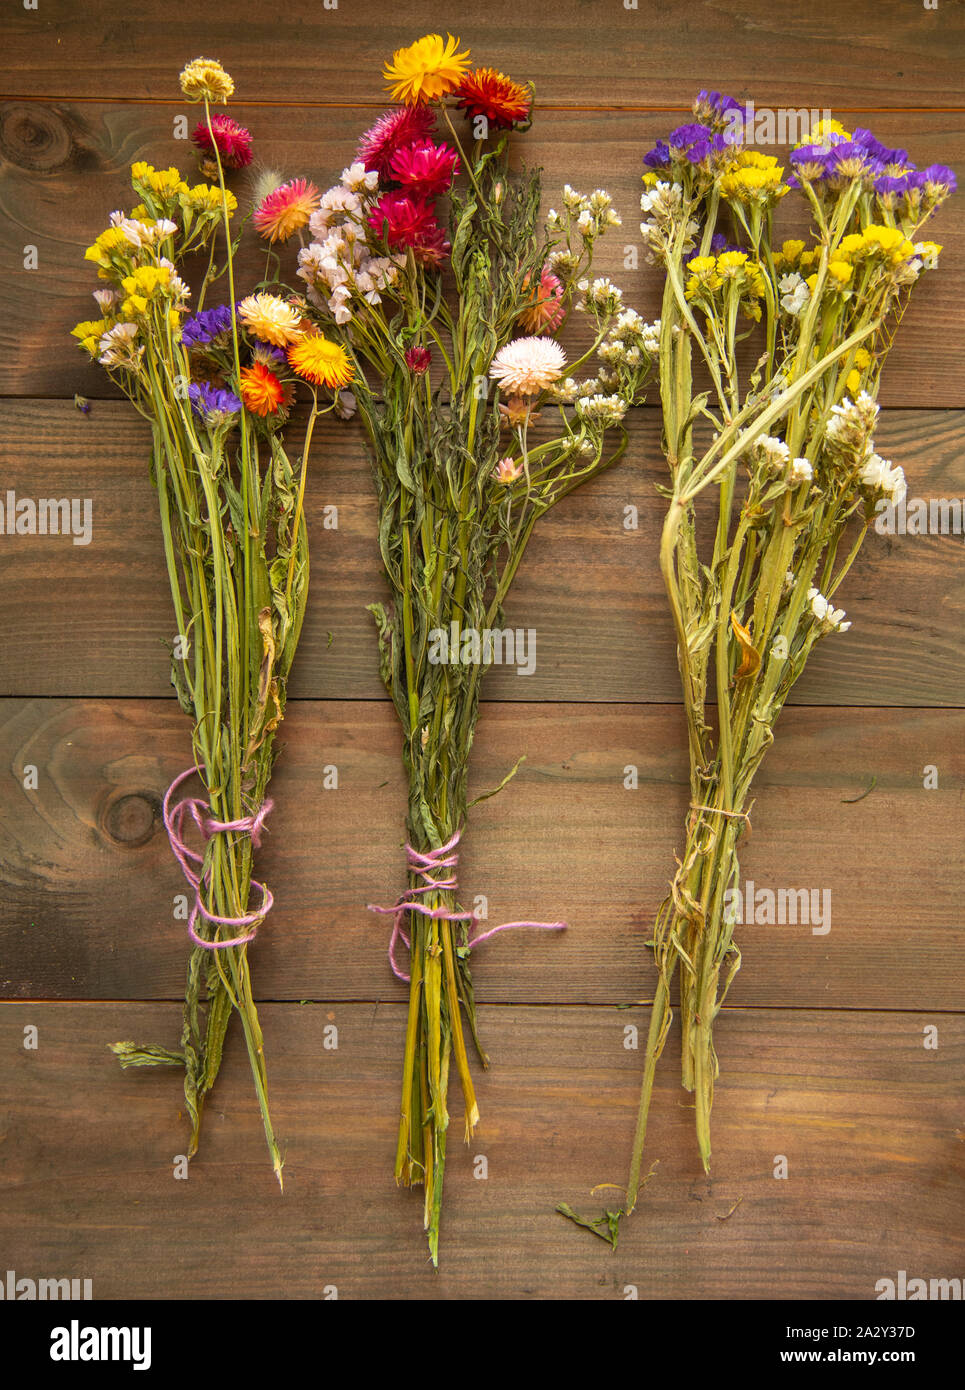 Three bright multi-colored bouquet of dried flowers on wooden background. Stock Photo